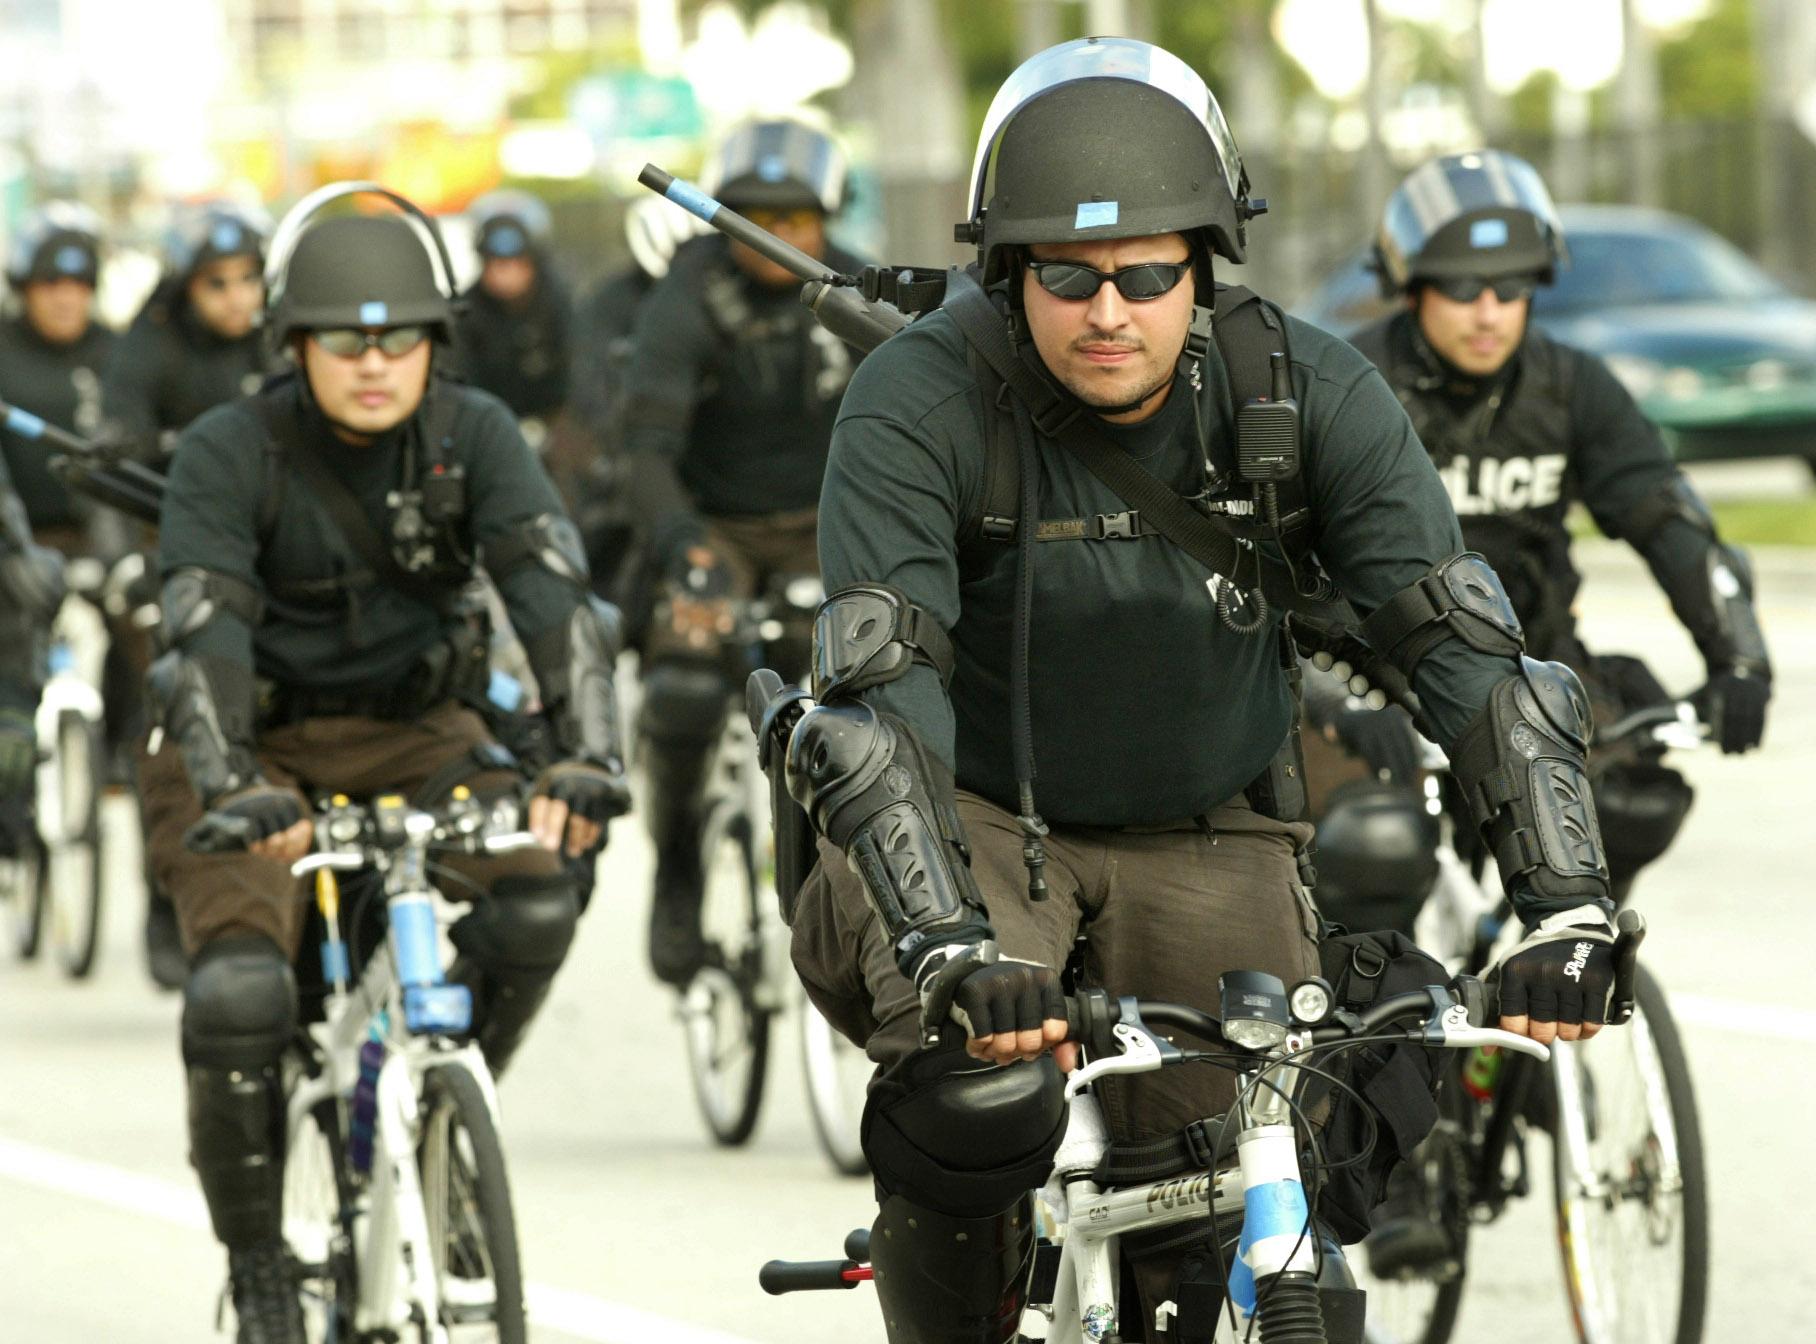 Riot police ride bicycles on Biscayne Boulevard in Florida.